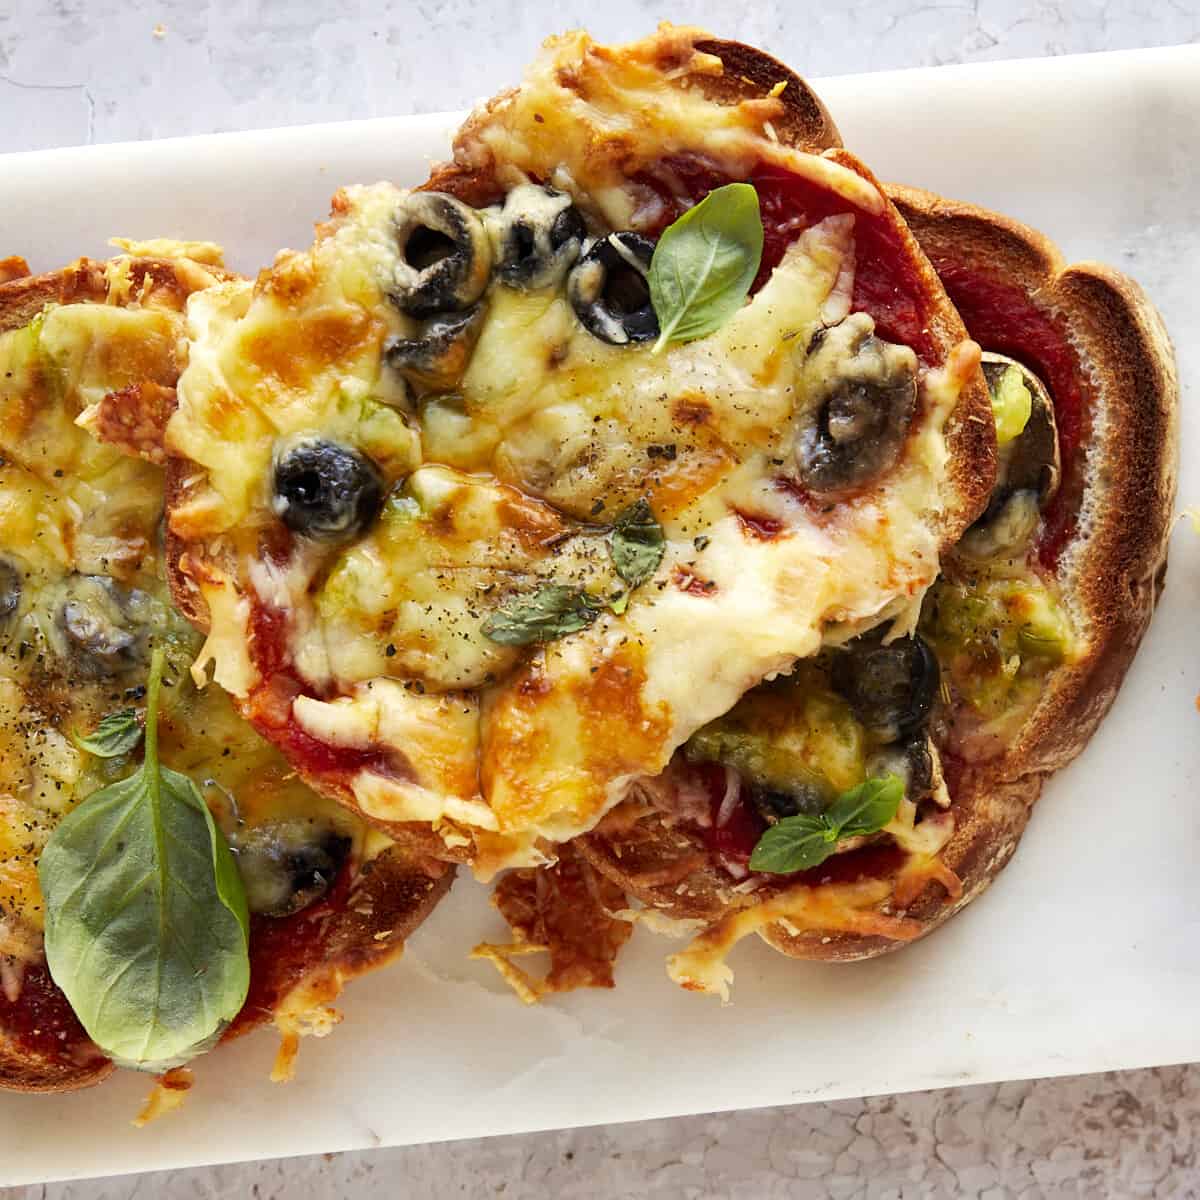 Slices of sheet pan pizza on a plate.